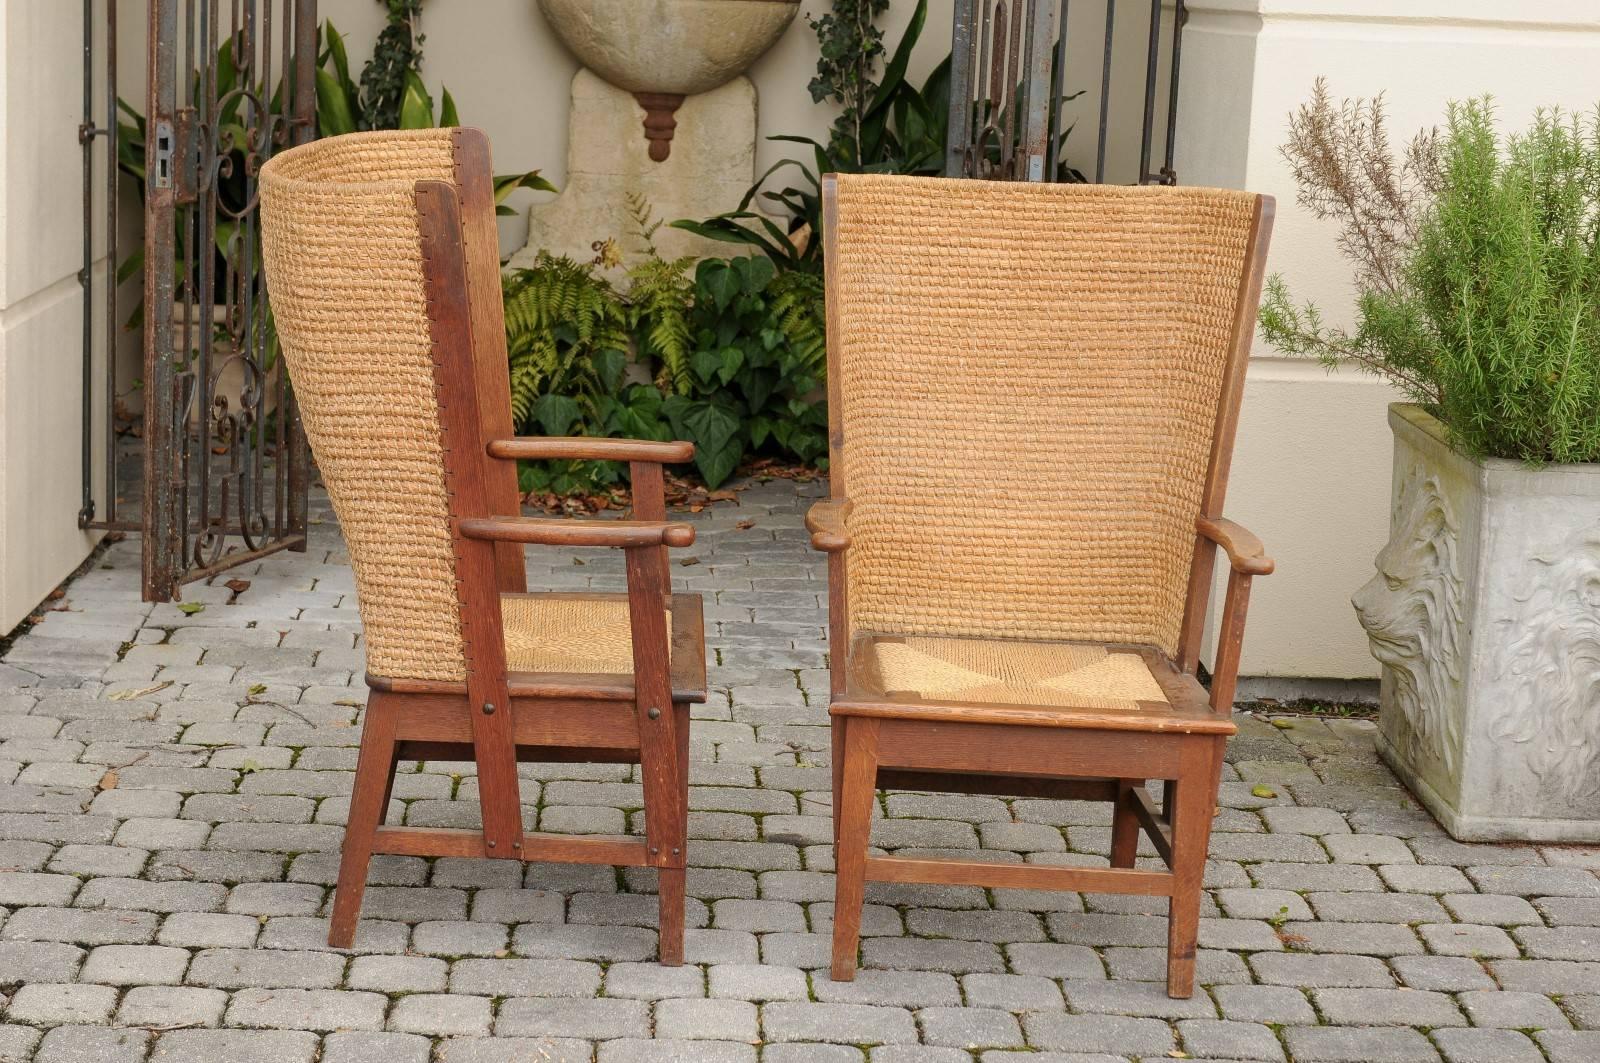 20th Century Pair of Scottish Mid-19th Century Oak Orkney Chairs with Handwoven Straw Backs